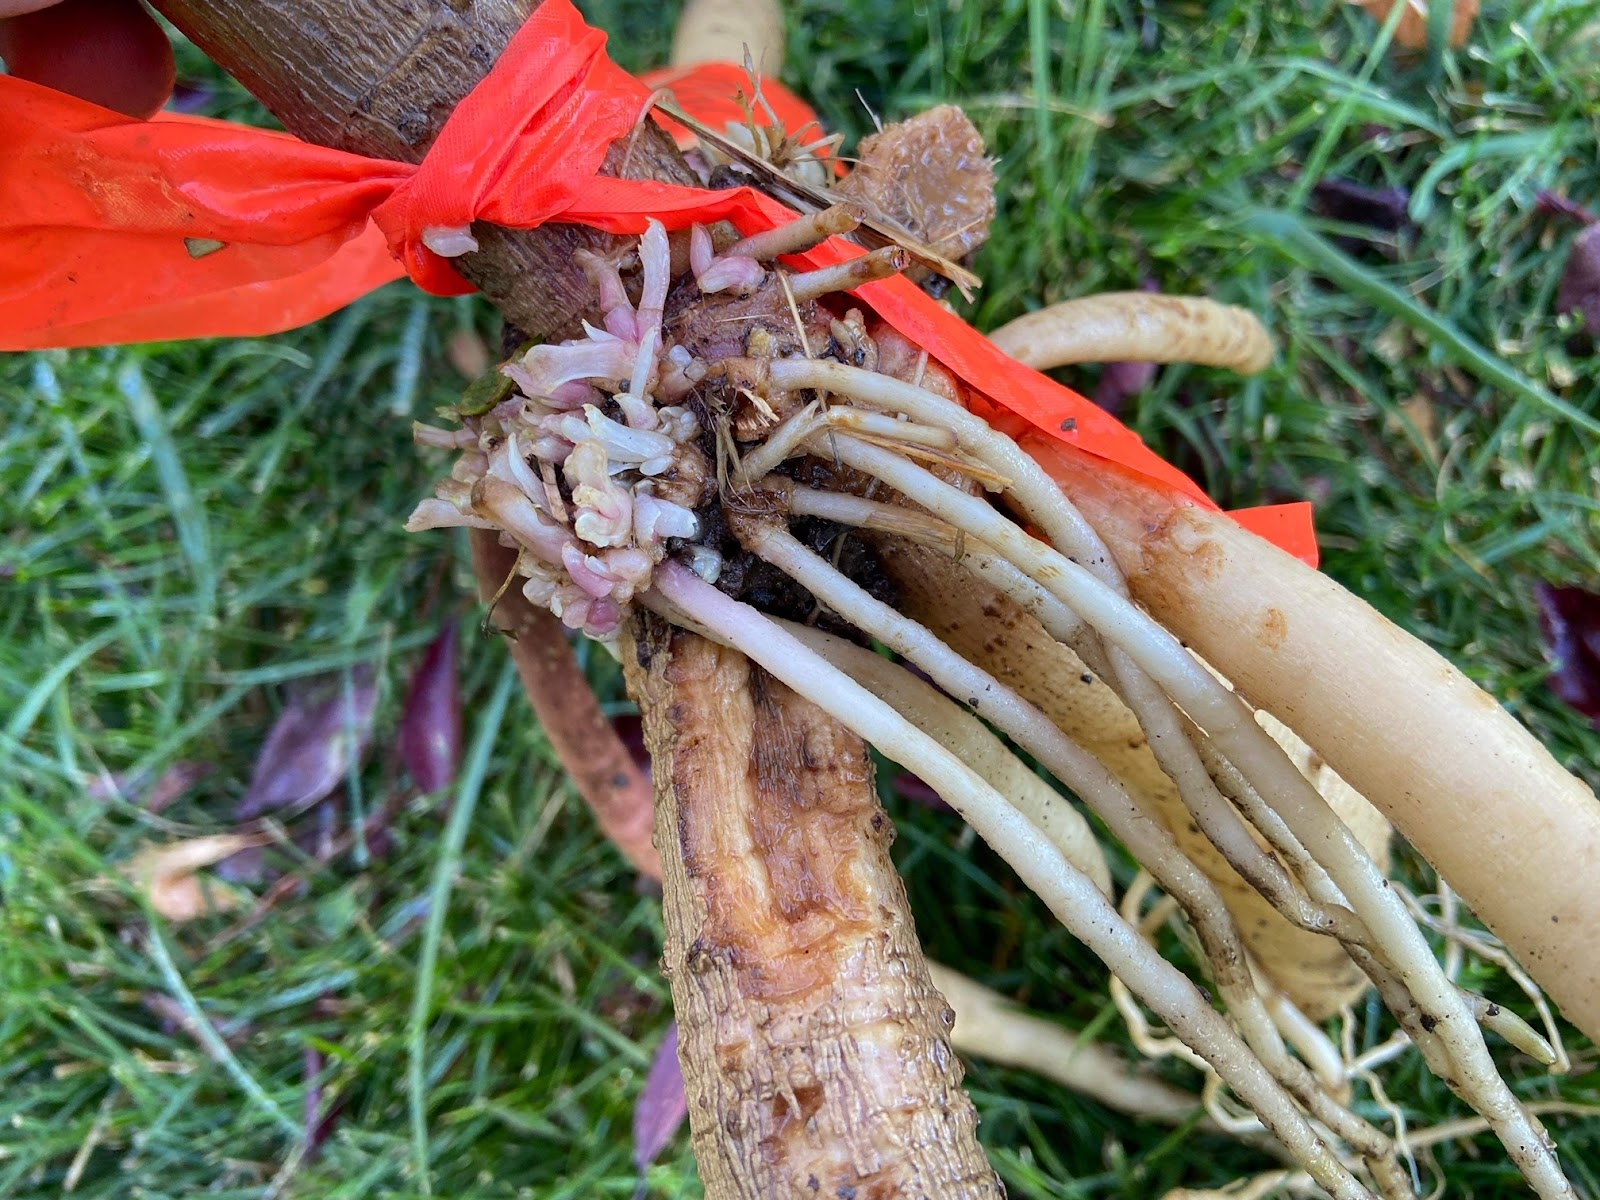 This tuber clump has 7 tiny long tubers less than a straw's width coming off a lesioned area of the plant. The lesion has dense growth, but the sprouts are not organized or growing in the fashion a normal sprout develops. 